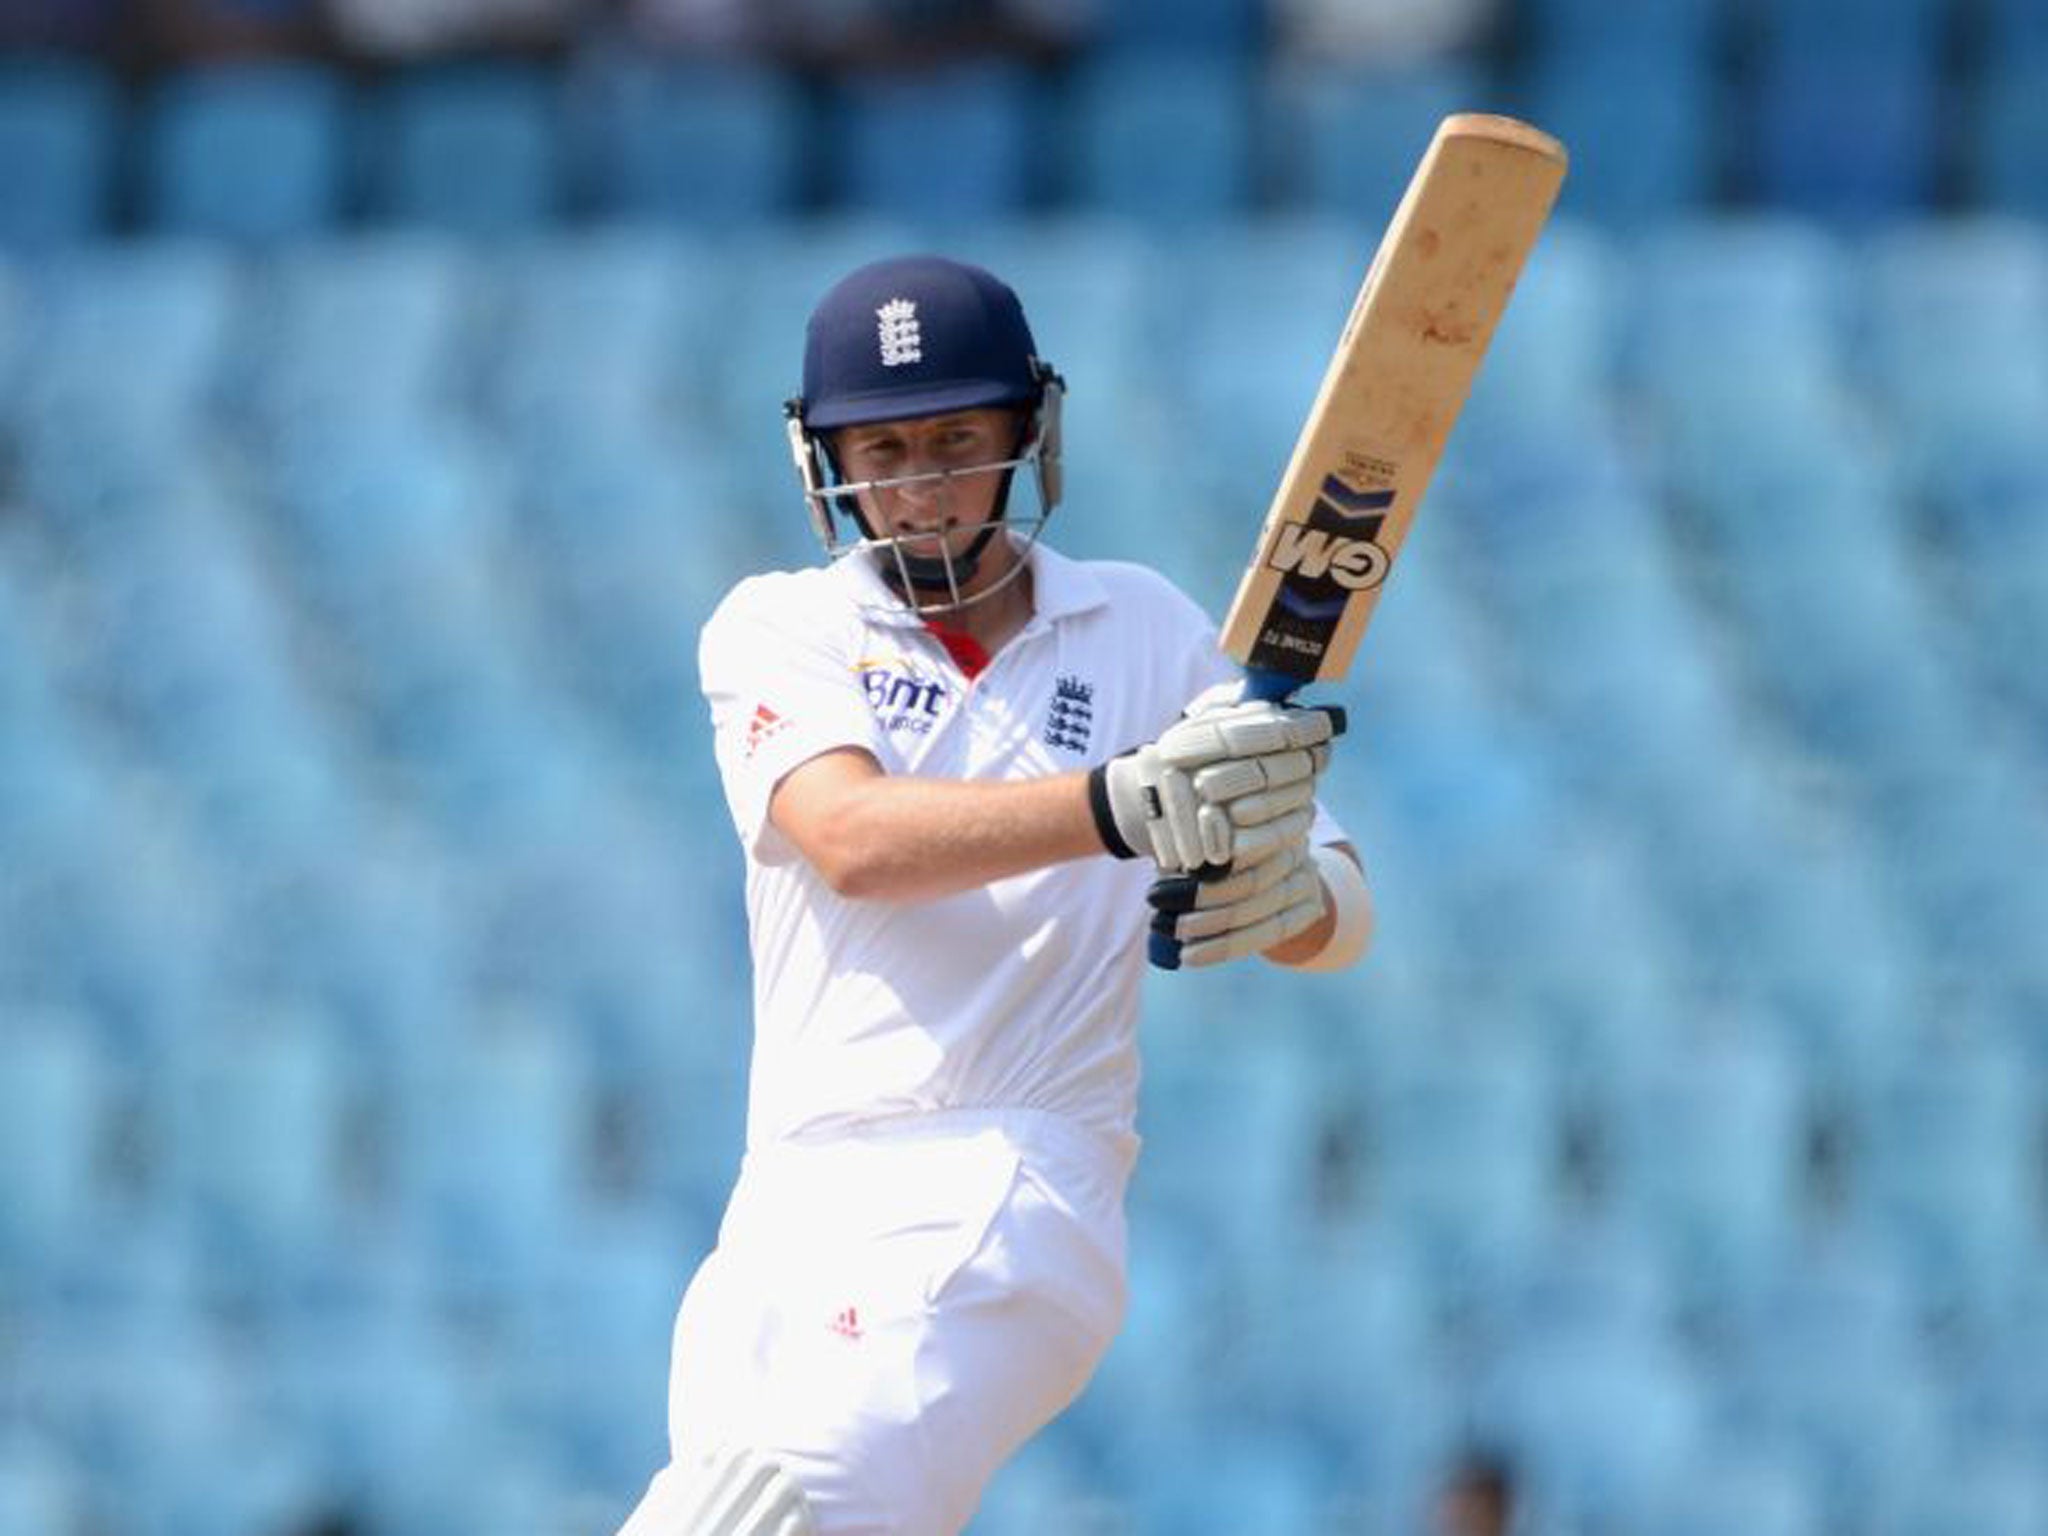 Joe Root should be saluted for his composed innings on debut